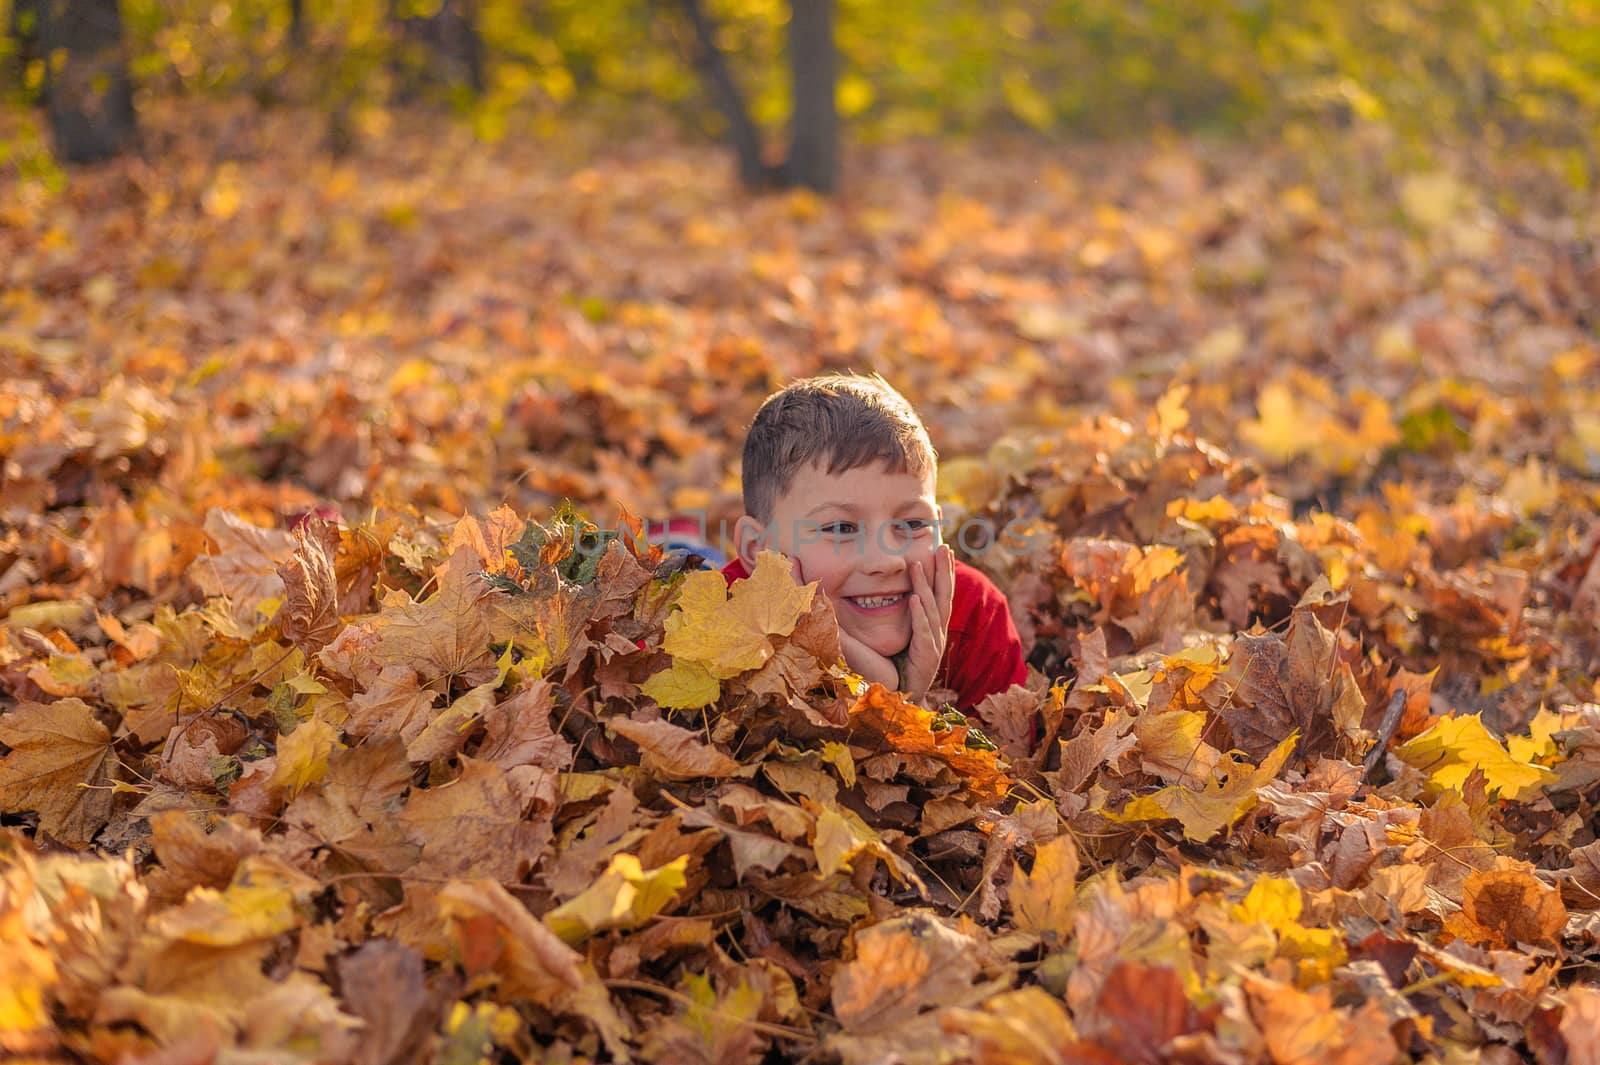 sly little boy hid in the yellow fallen foliage in the autumn park